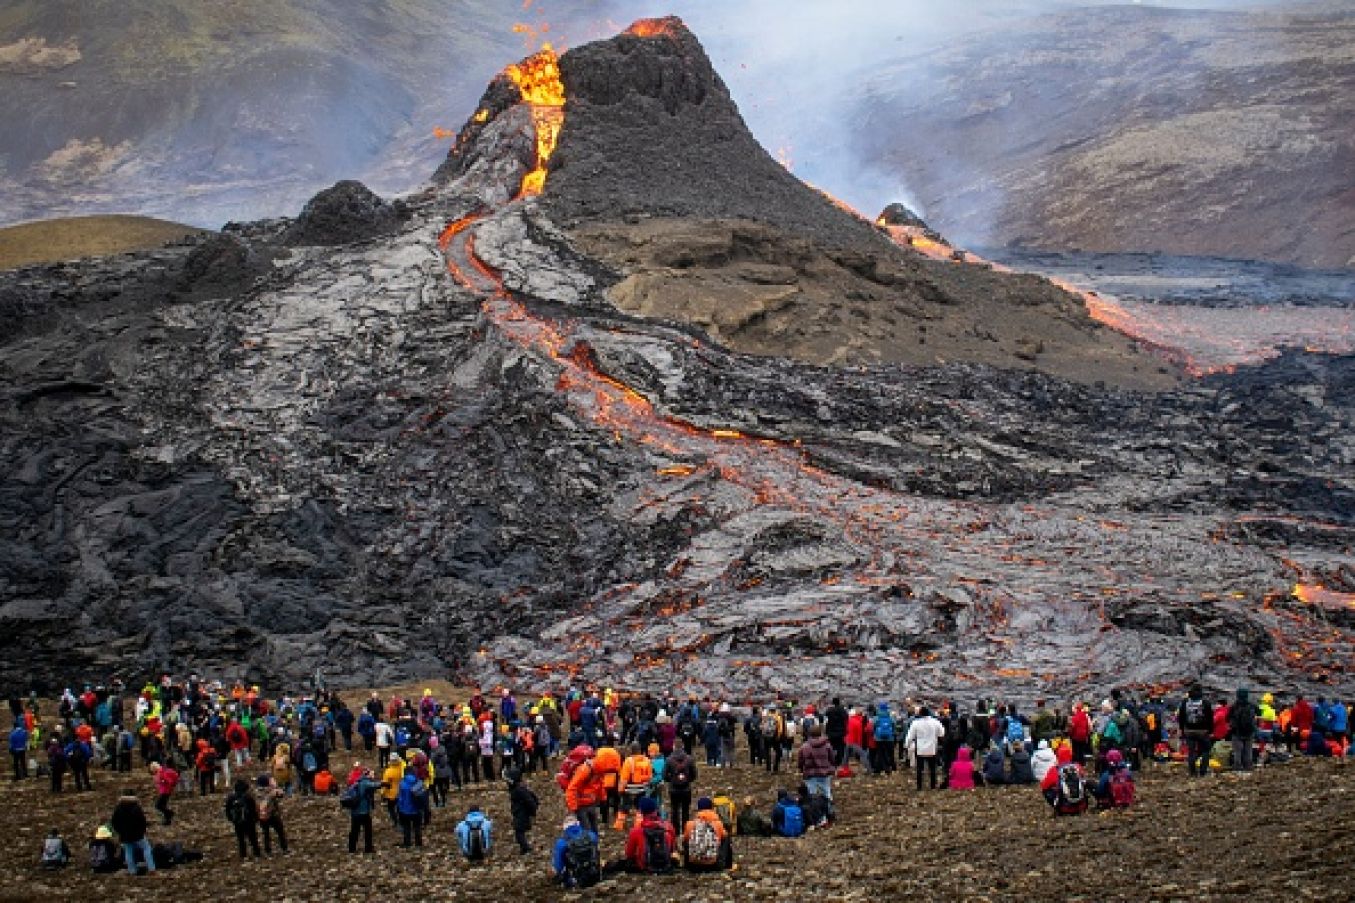 Sunday Hikers Look At The Lava Flowing From The Erupting Fagradalsfjall Volcano Some 40 Km West Of The Icelandic Capital Reykjavik. Photo: Jermie Richard/Afp Via Getty Images